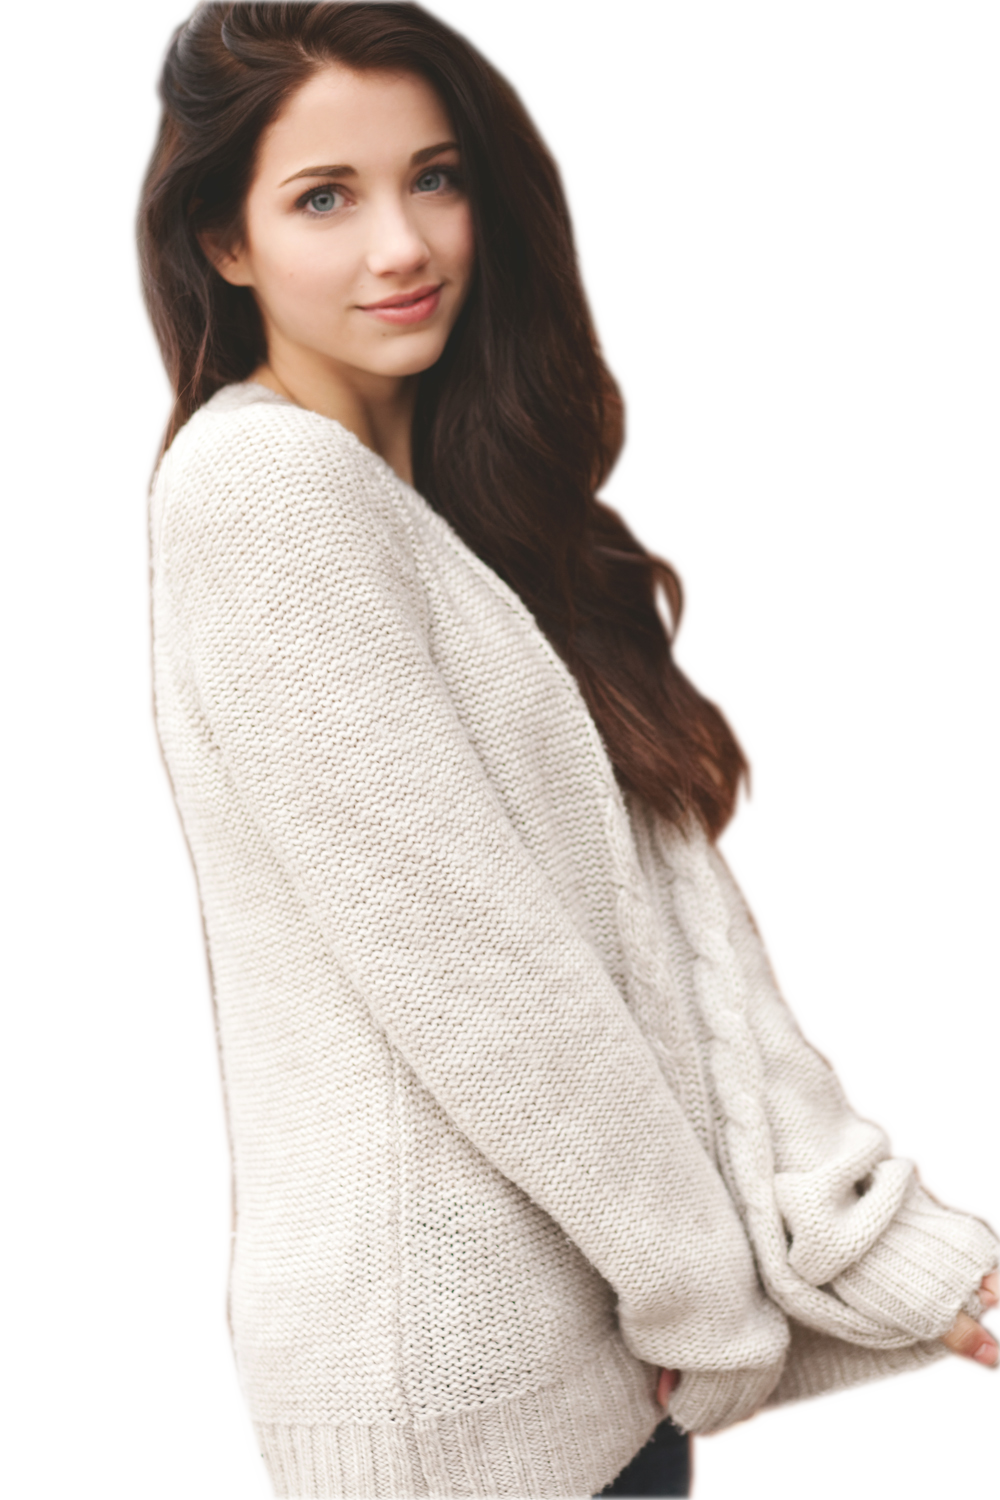 Emily Rudd Png Image - Emily Rudd, Transparent background PNG HD thumbnail